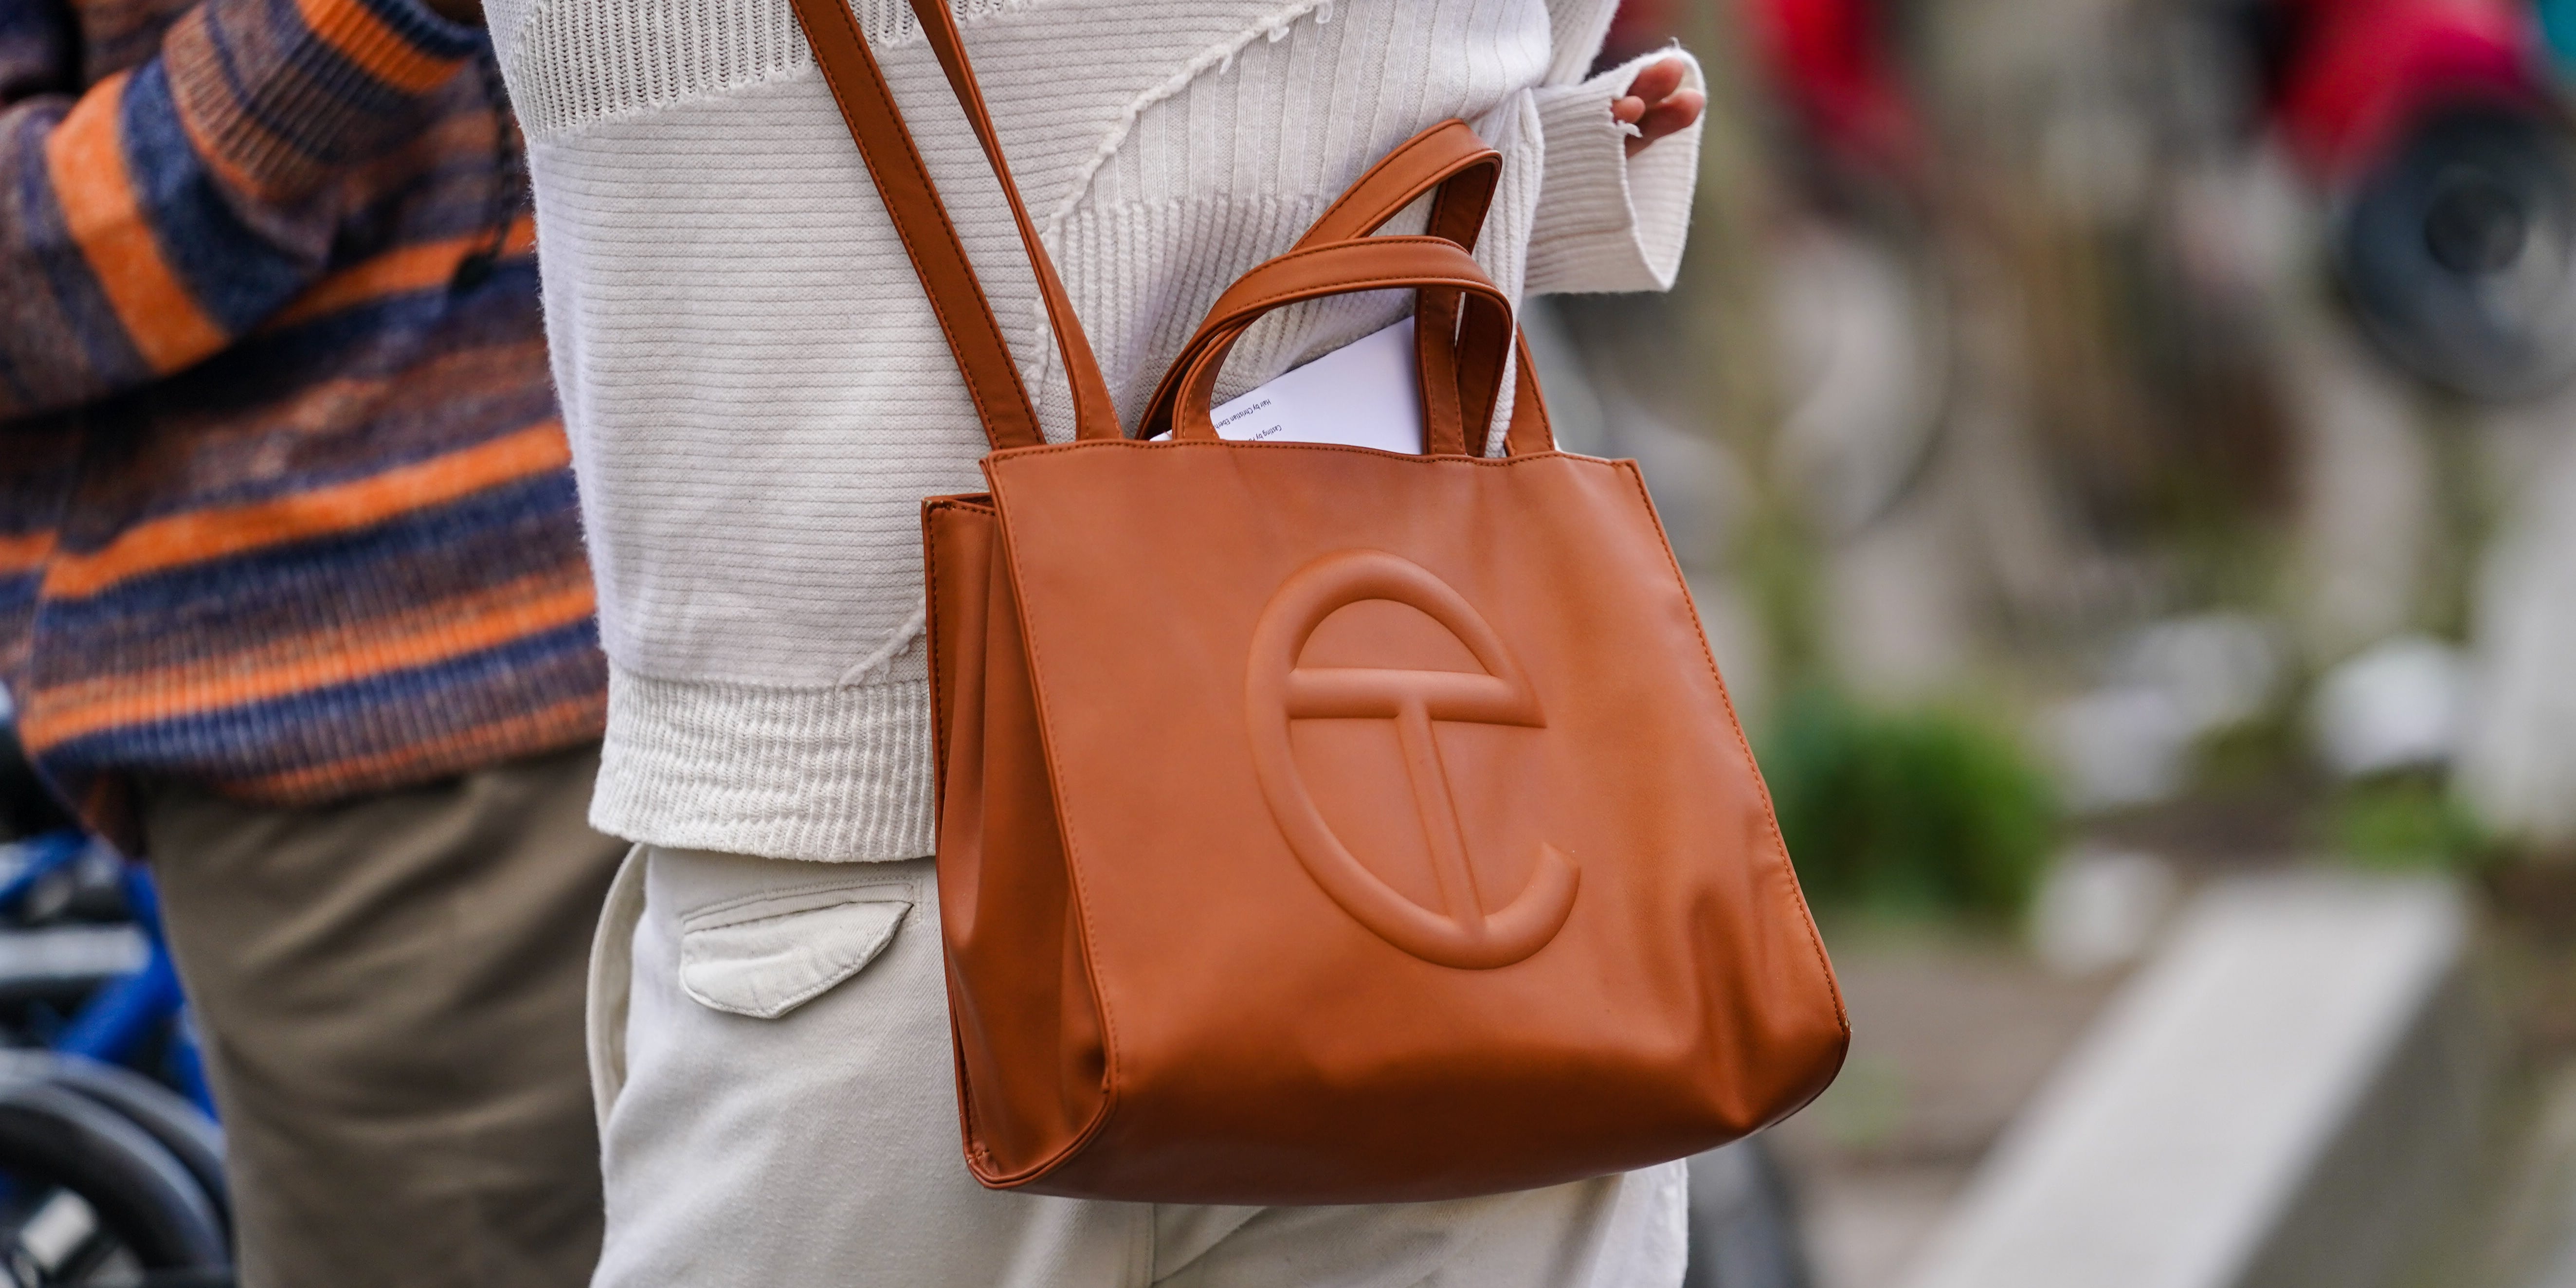 Telfar Introduces 'Bag Security Program' for Its Beloved Shopping